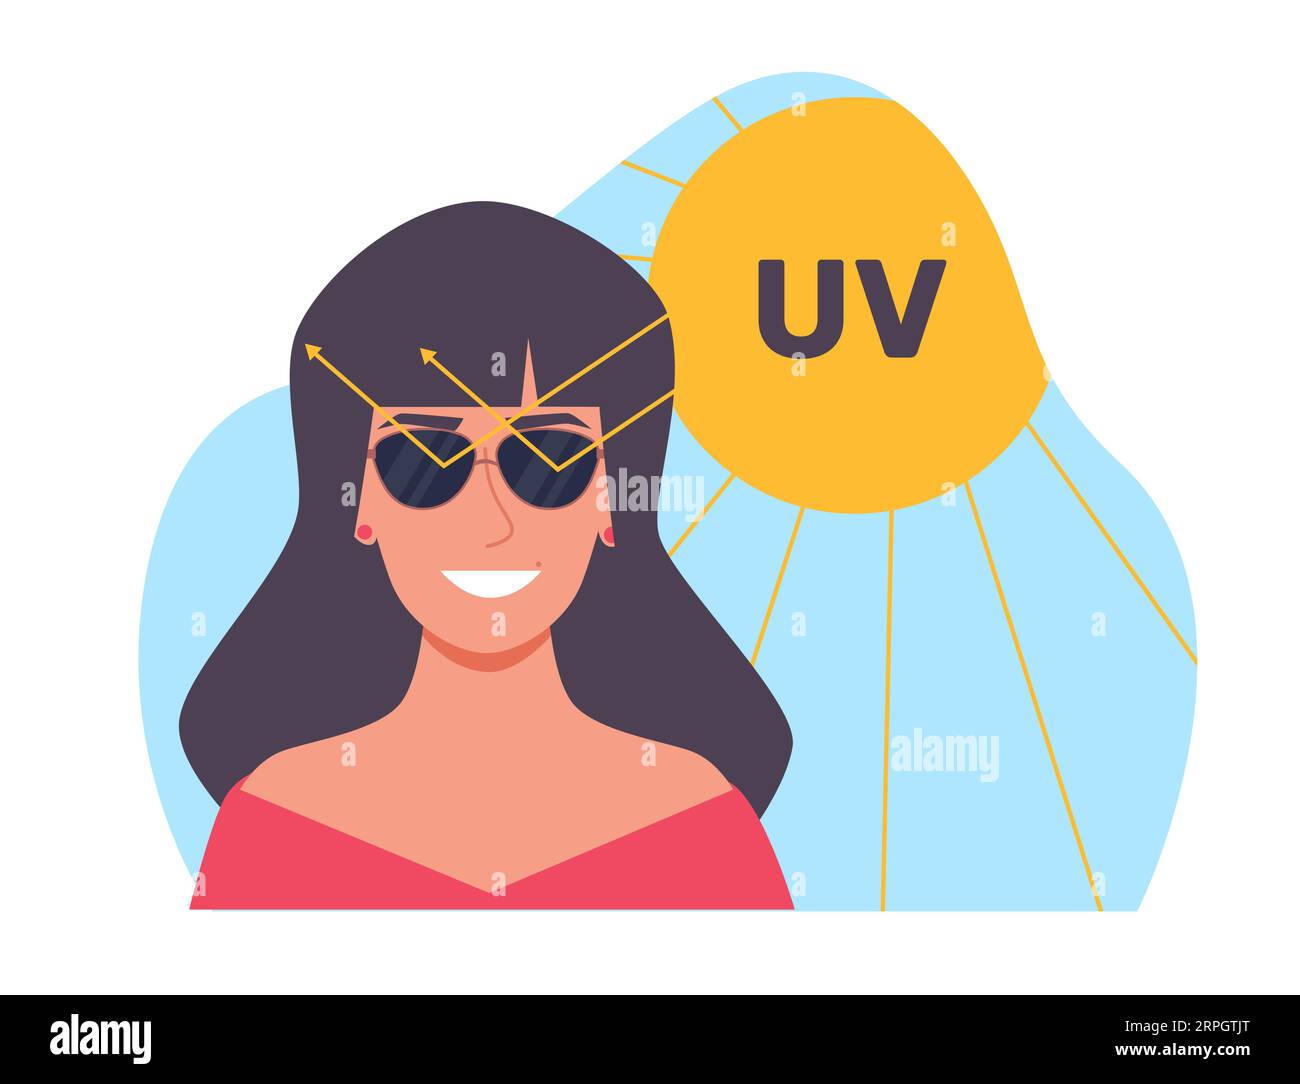 https://c8.alamy.com/comp/2RPGTJT/sunglasses-on-woman-protect-her-eyes-from-ultraviolet-uva-uvb-light-happy-woman-in-black-glasses-with-uv-protection-polarized-lenses-cartoon-flat-2RPGTJT.jpg